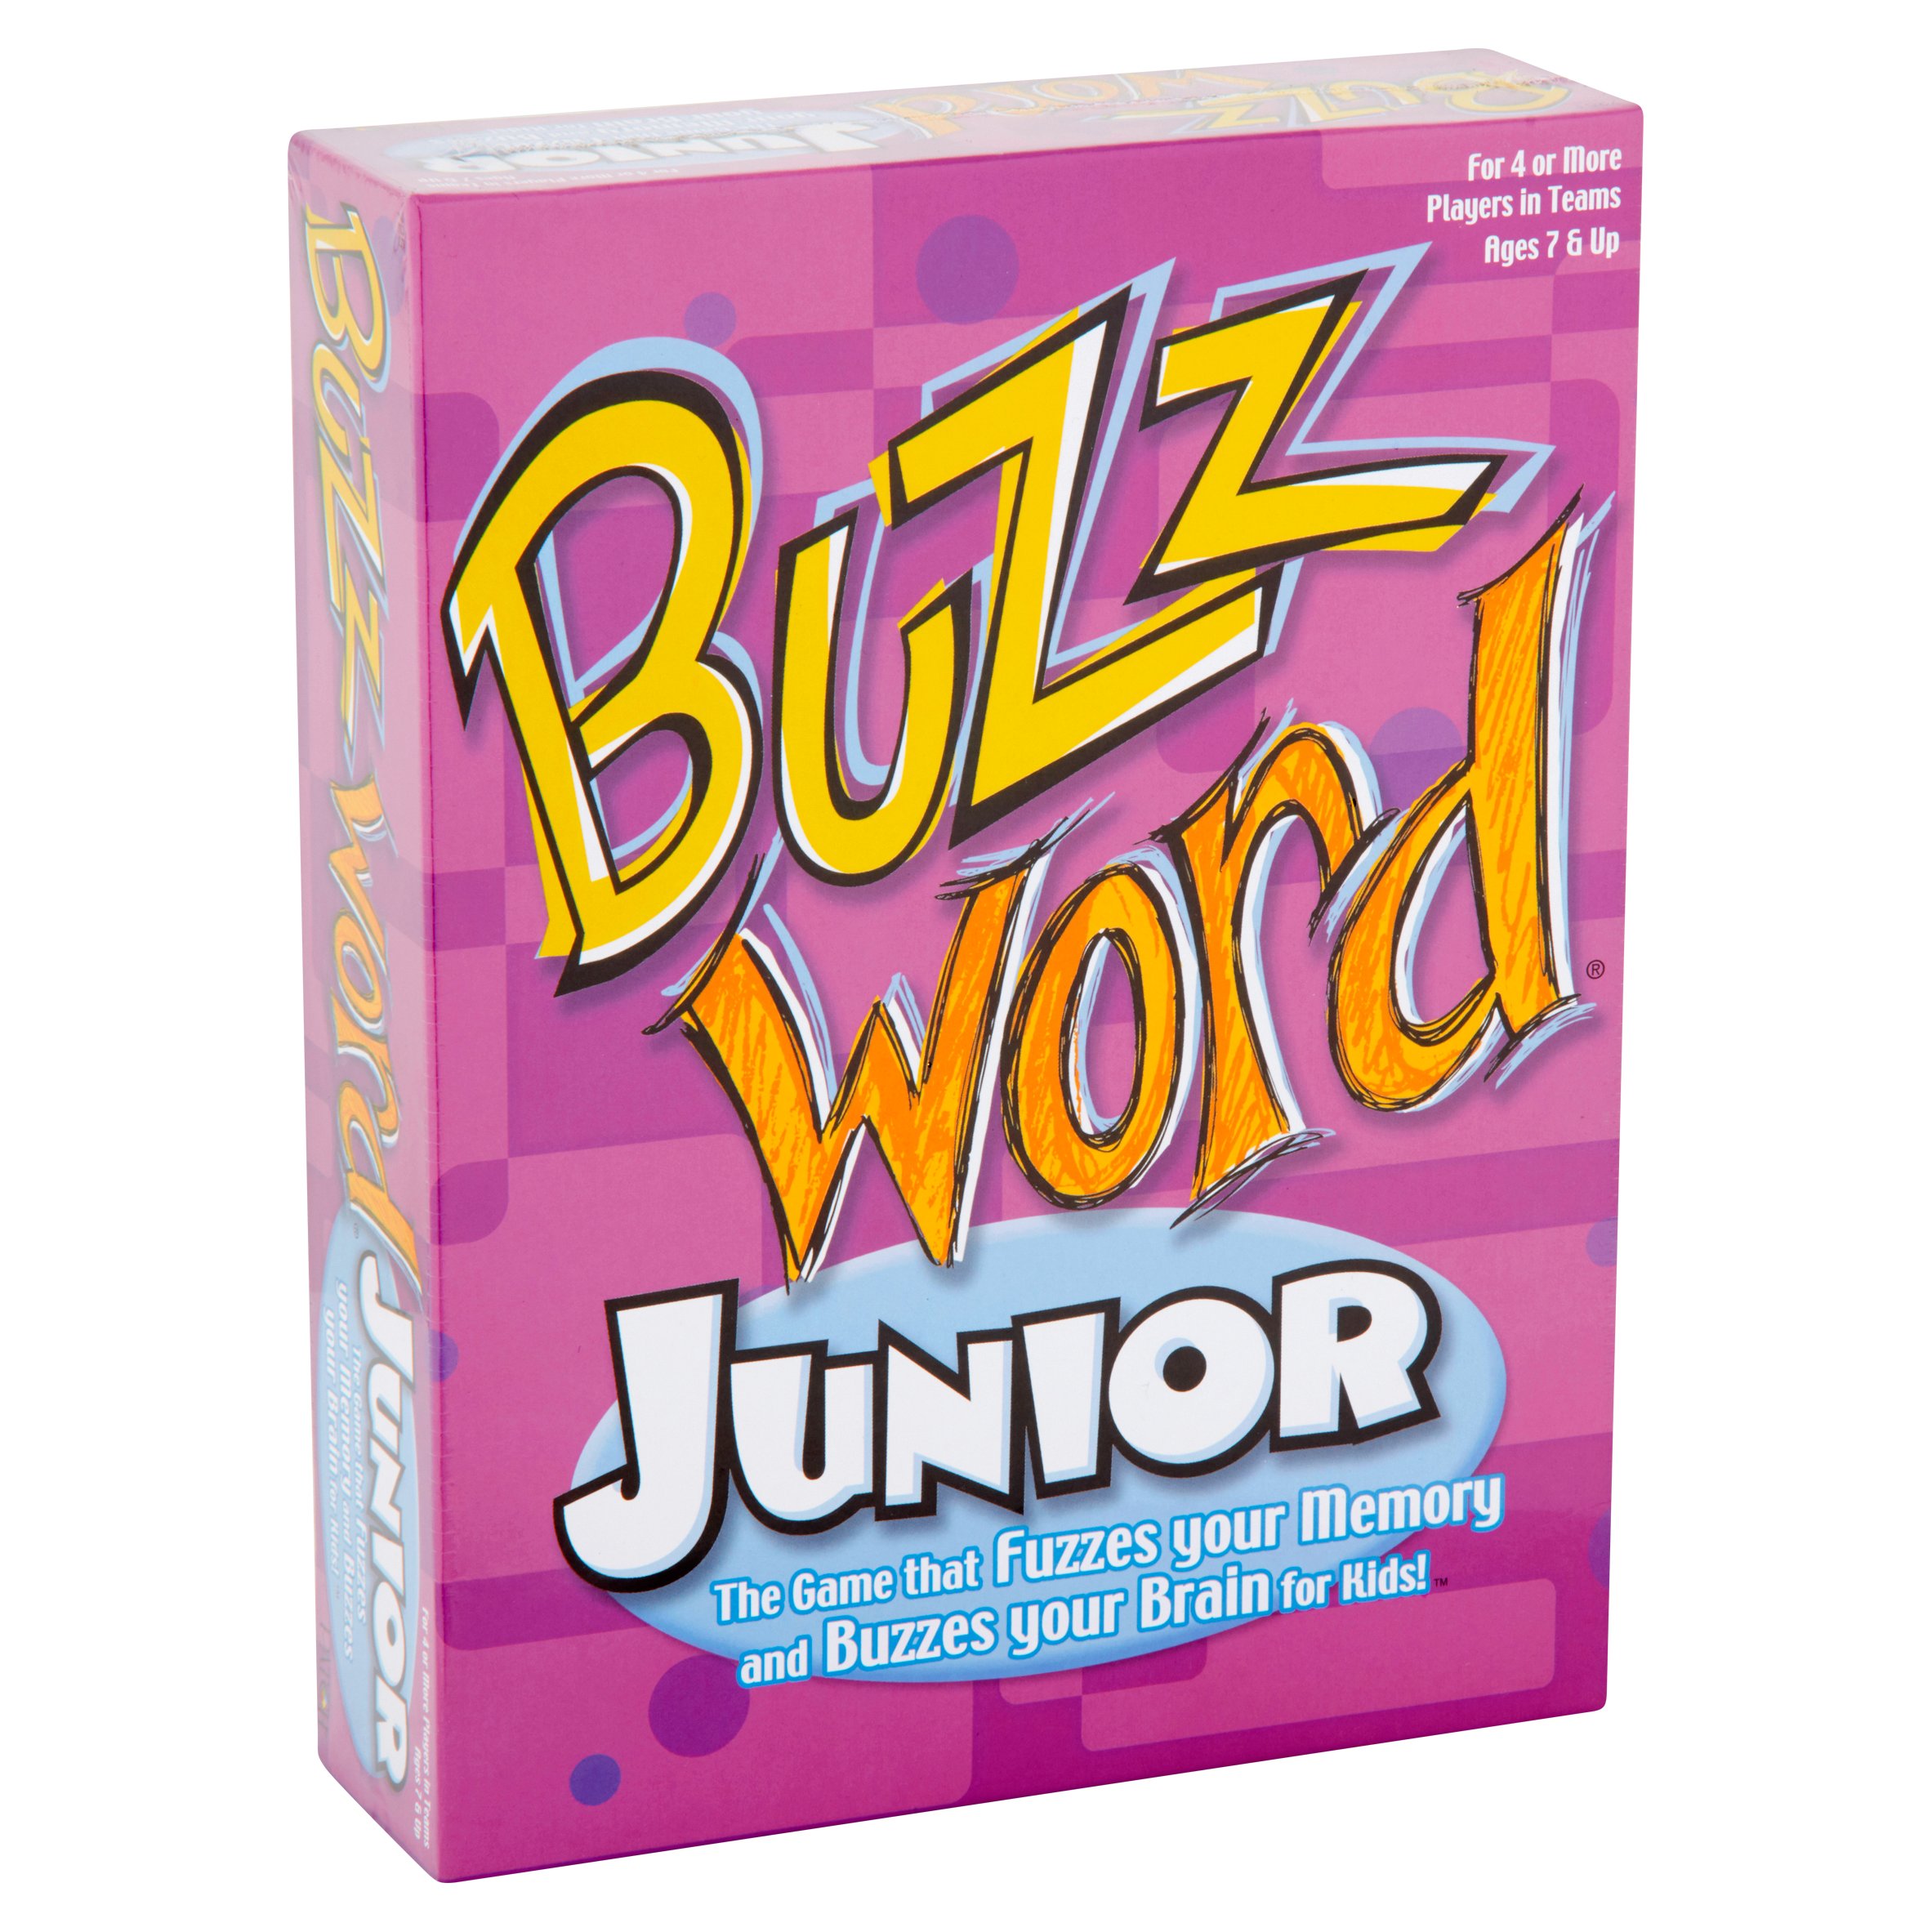 Patch Buzz Word Junior Game Ages 7 & up - image 2 of 5